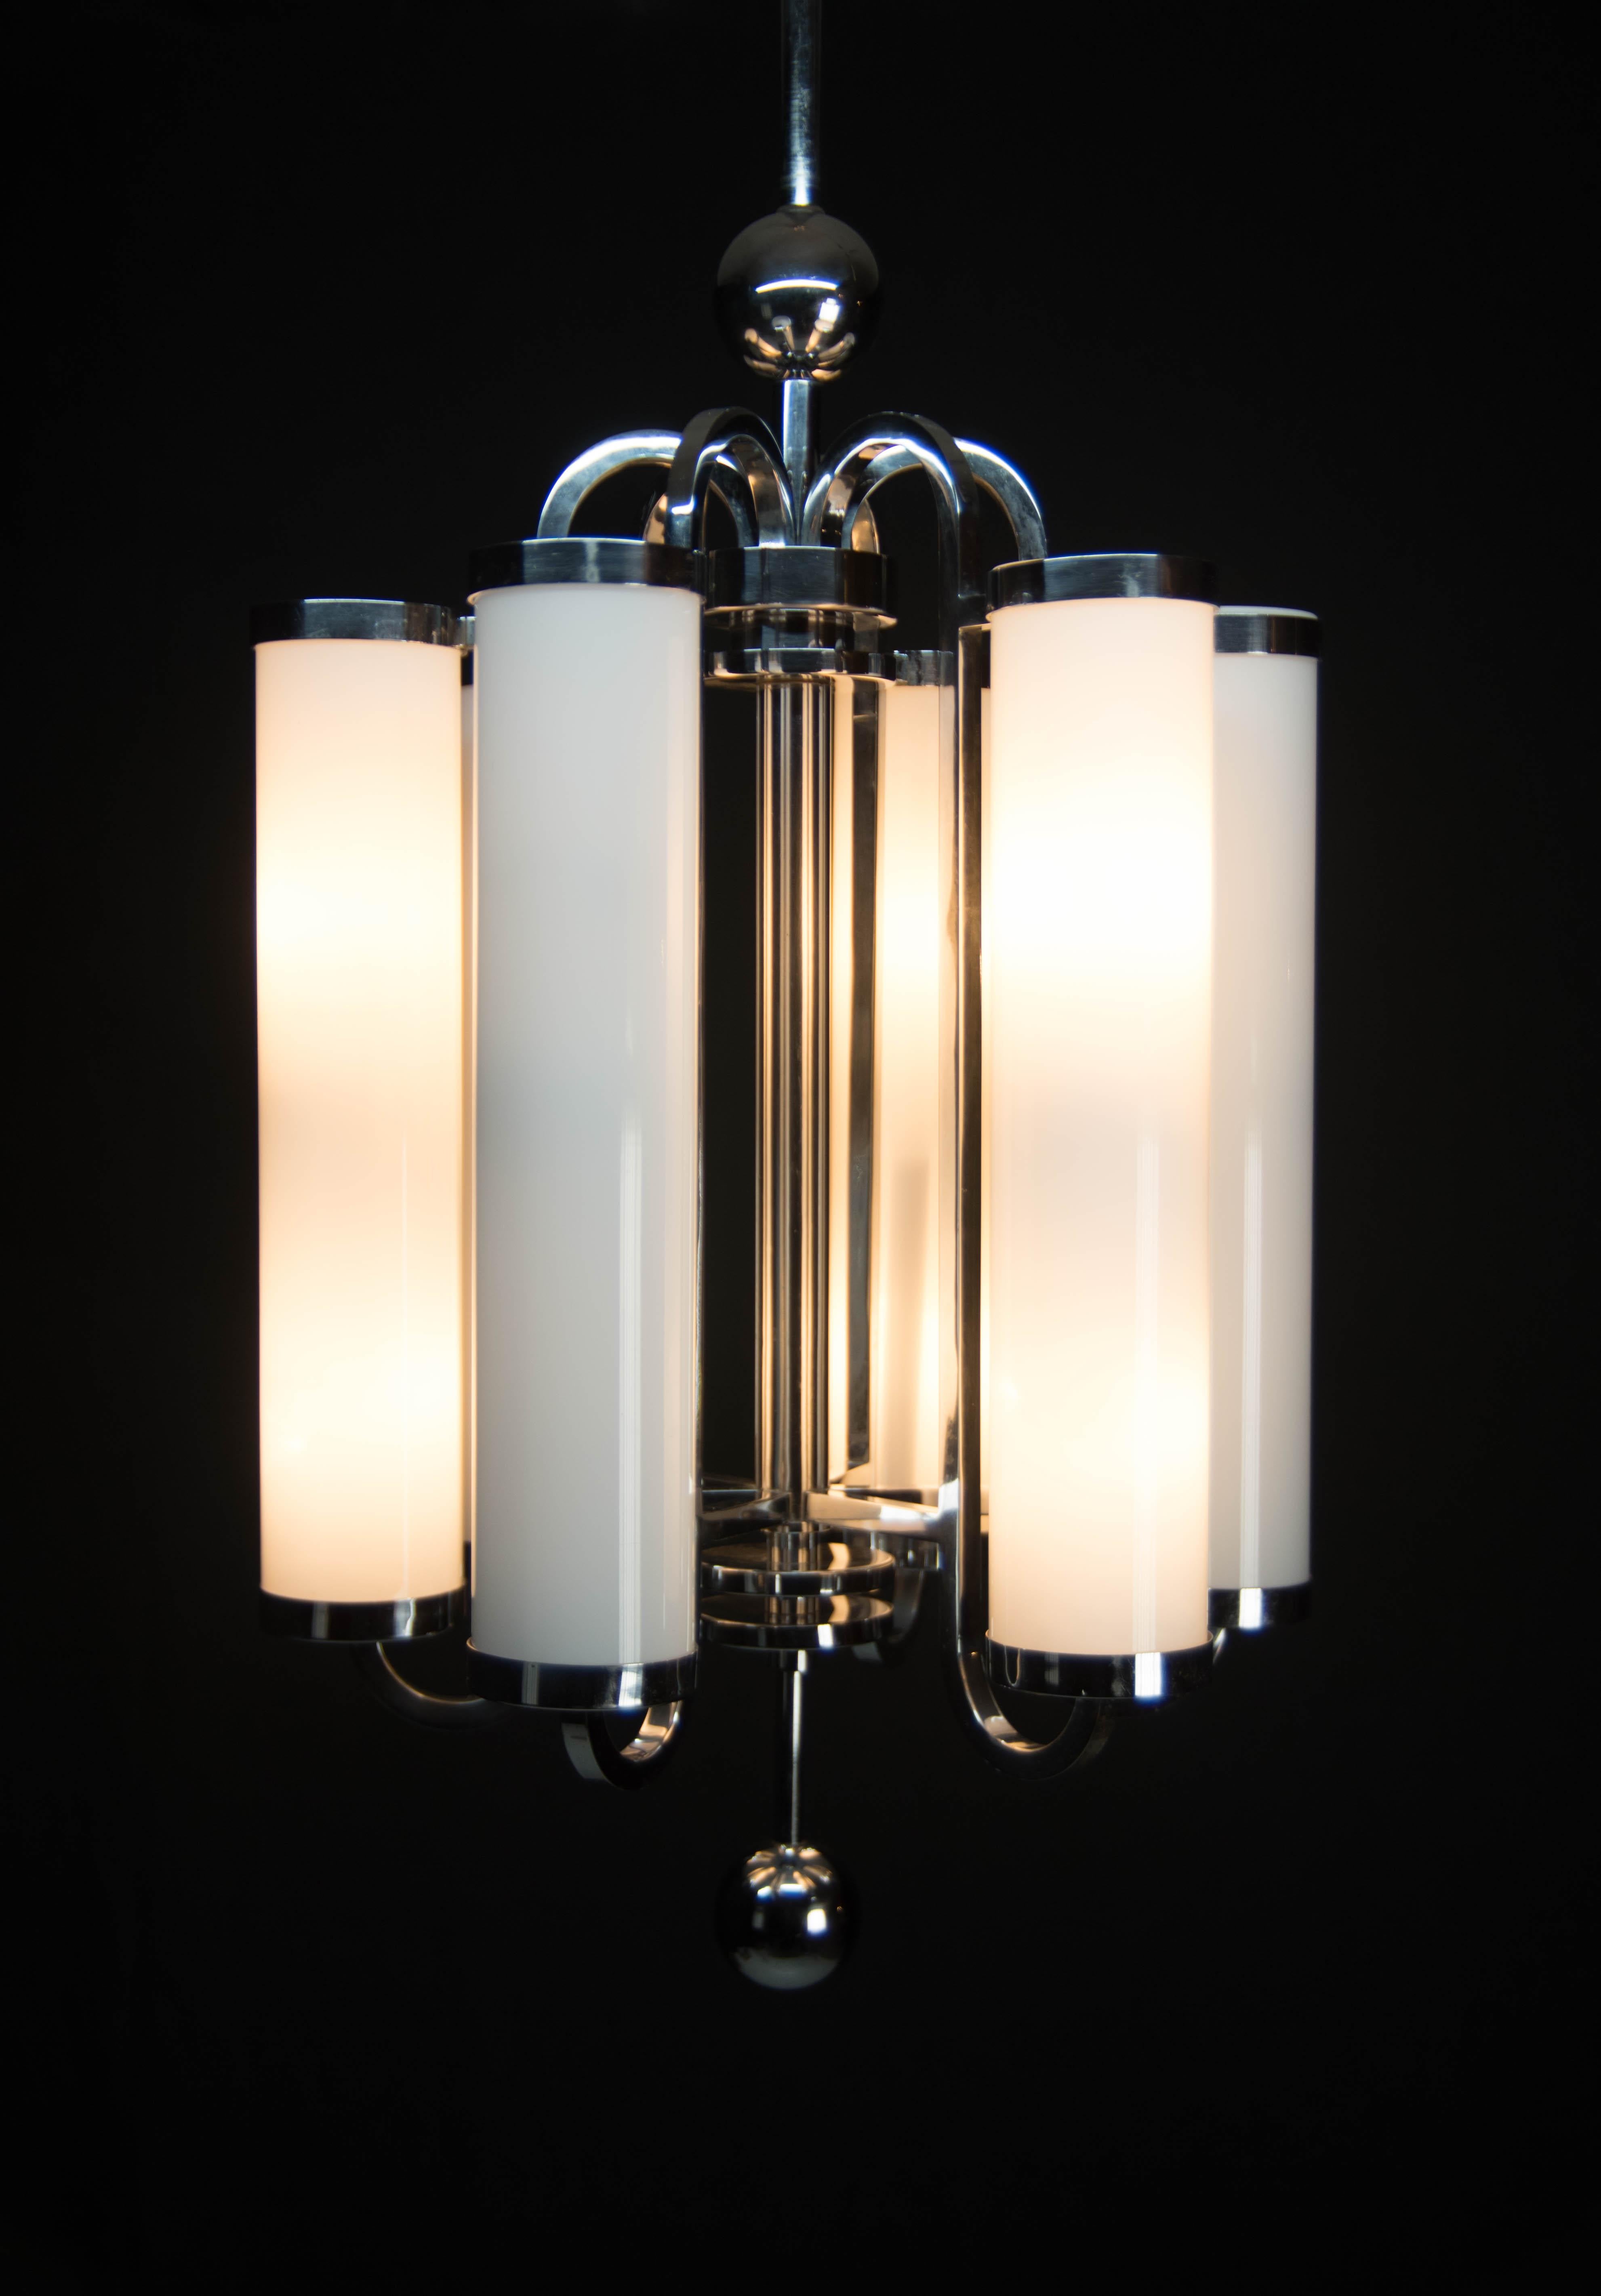 Unique beautiful huge Bauhaus chandelier with two separate circuits - 6+6 40W bulbs.
Chrome-plating with age patina in a good condition - polished
Glass shade measures: height 40cm, diameter 8cm
Rod could be shortened on demand
Rewired - US